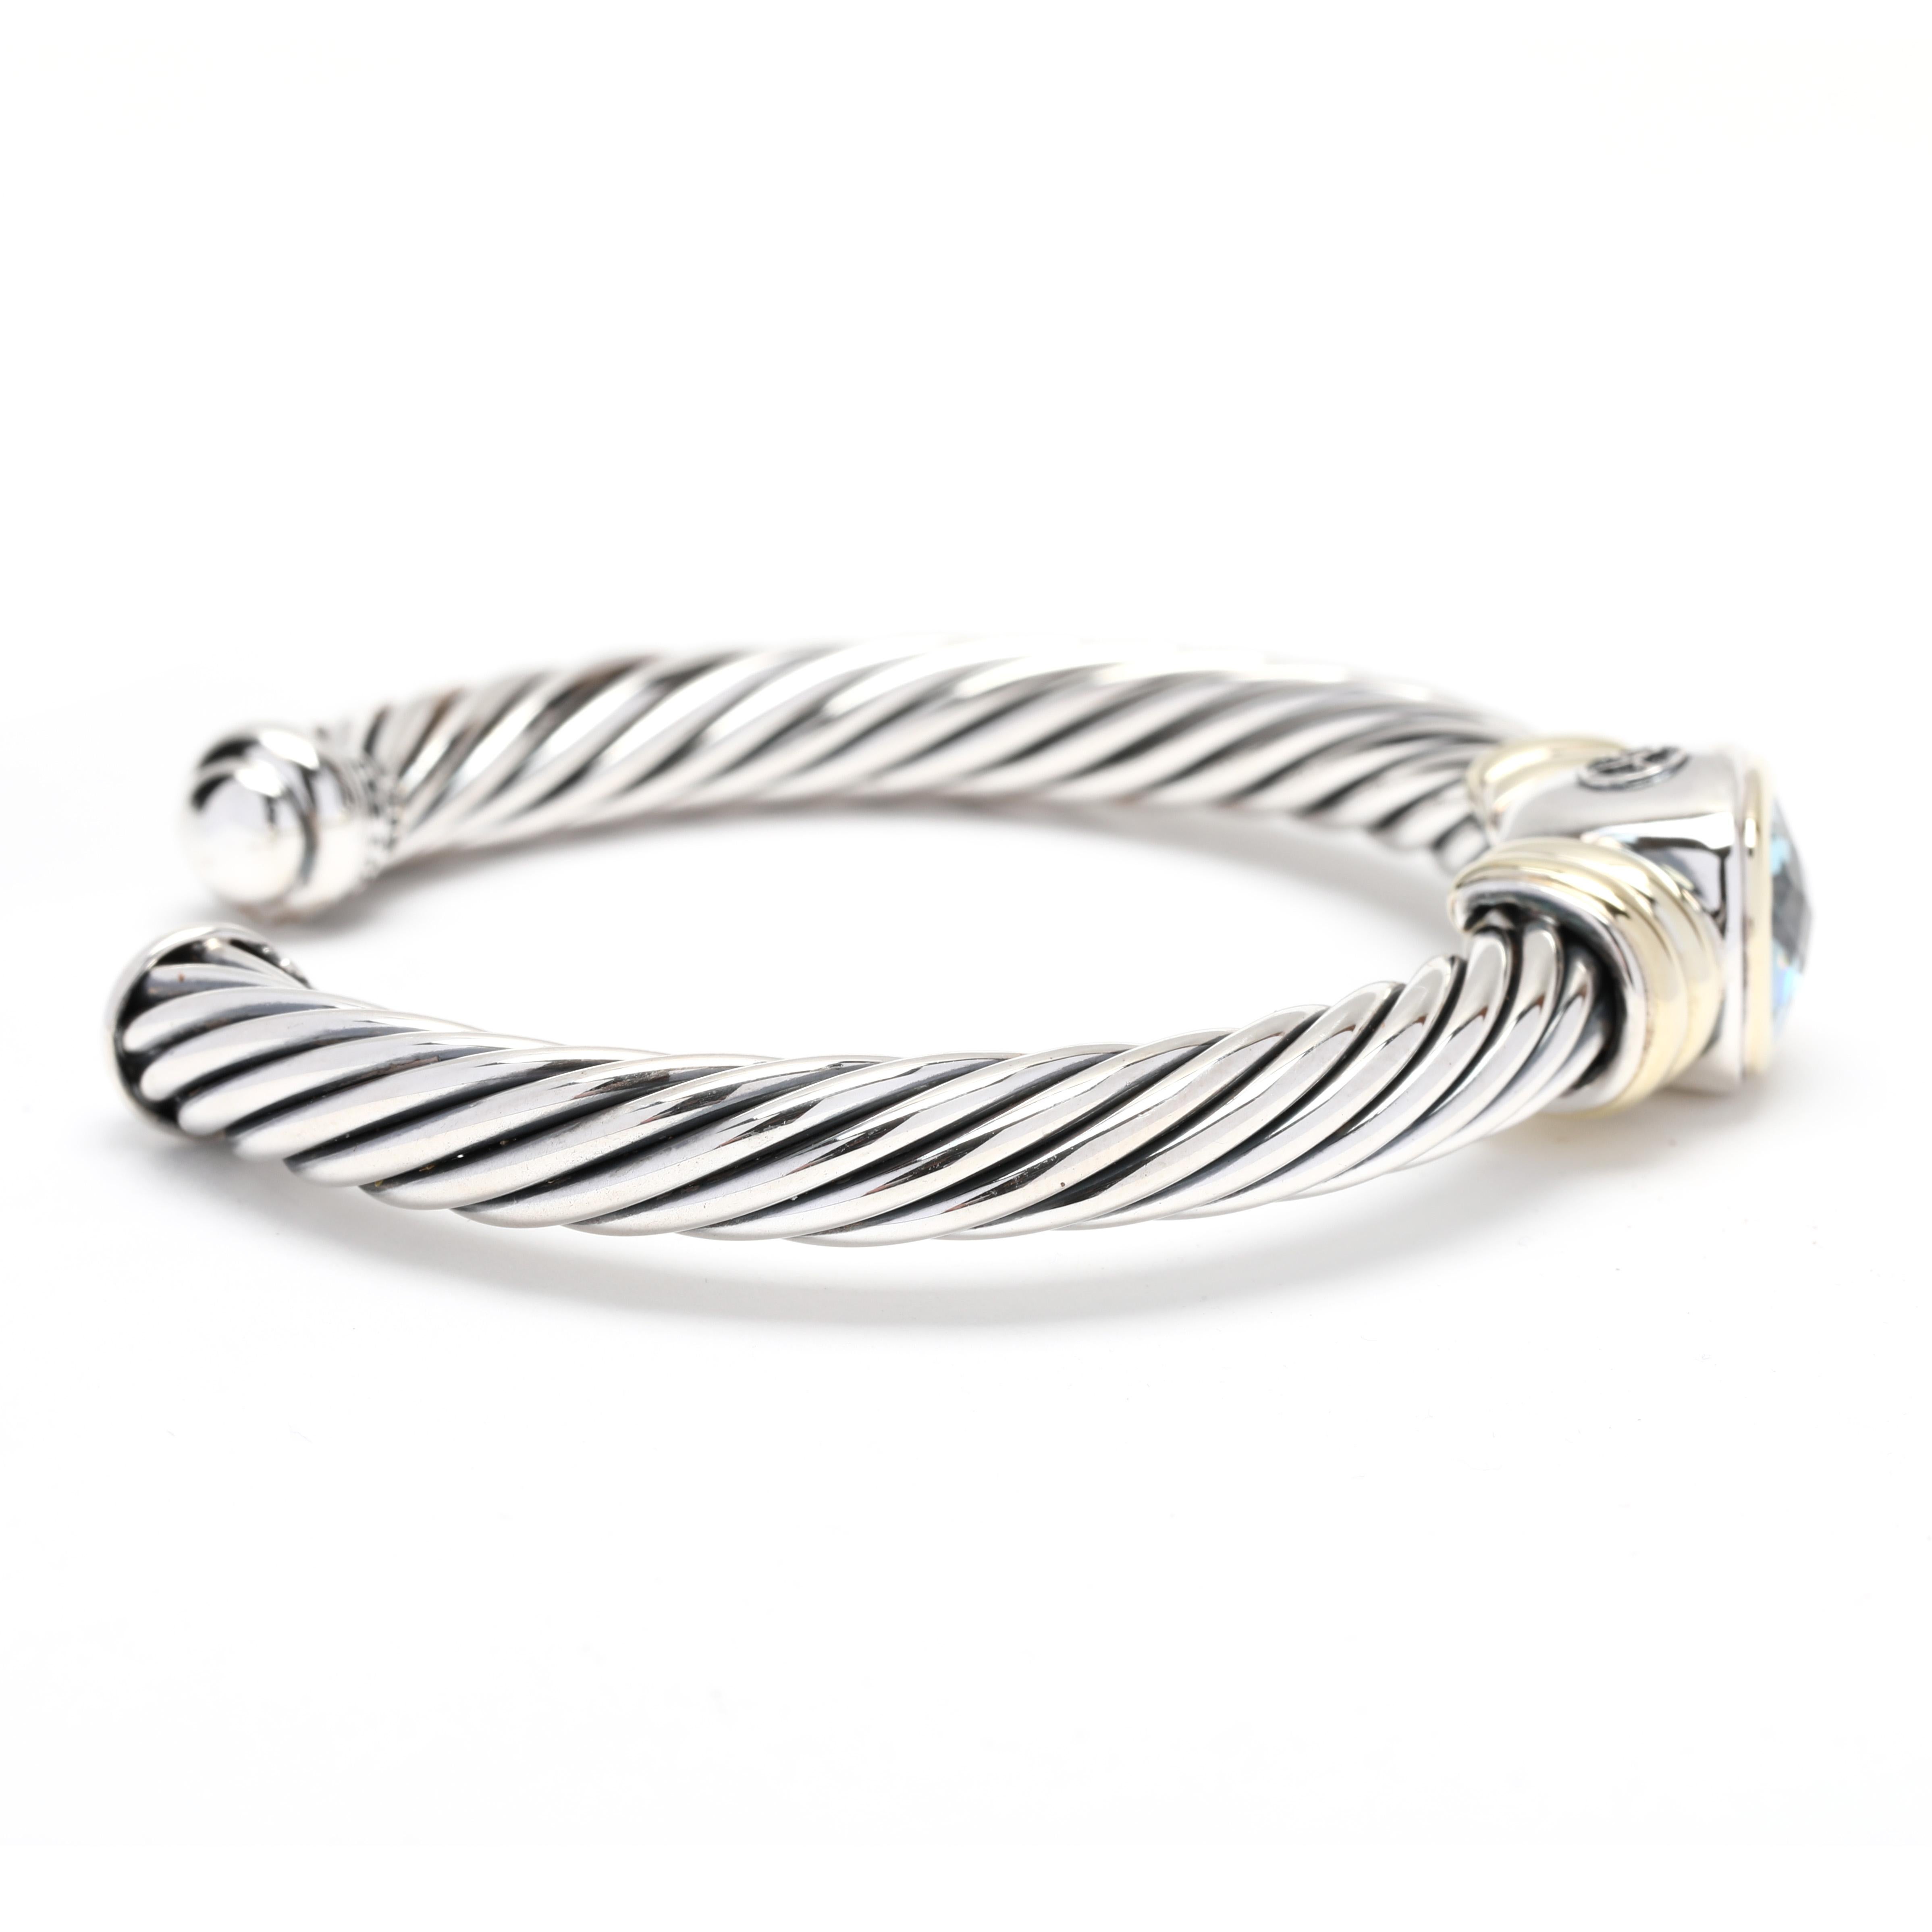 This beautiful David Yurman Noblesse Blue Topaz Cuff Bracelet is crafted from 14K yellow gold and sterling silver and features a captivating horizontal cable cuff. A coveted piece from the Noblesse Collection, the stylish design is completed with a